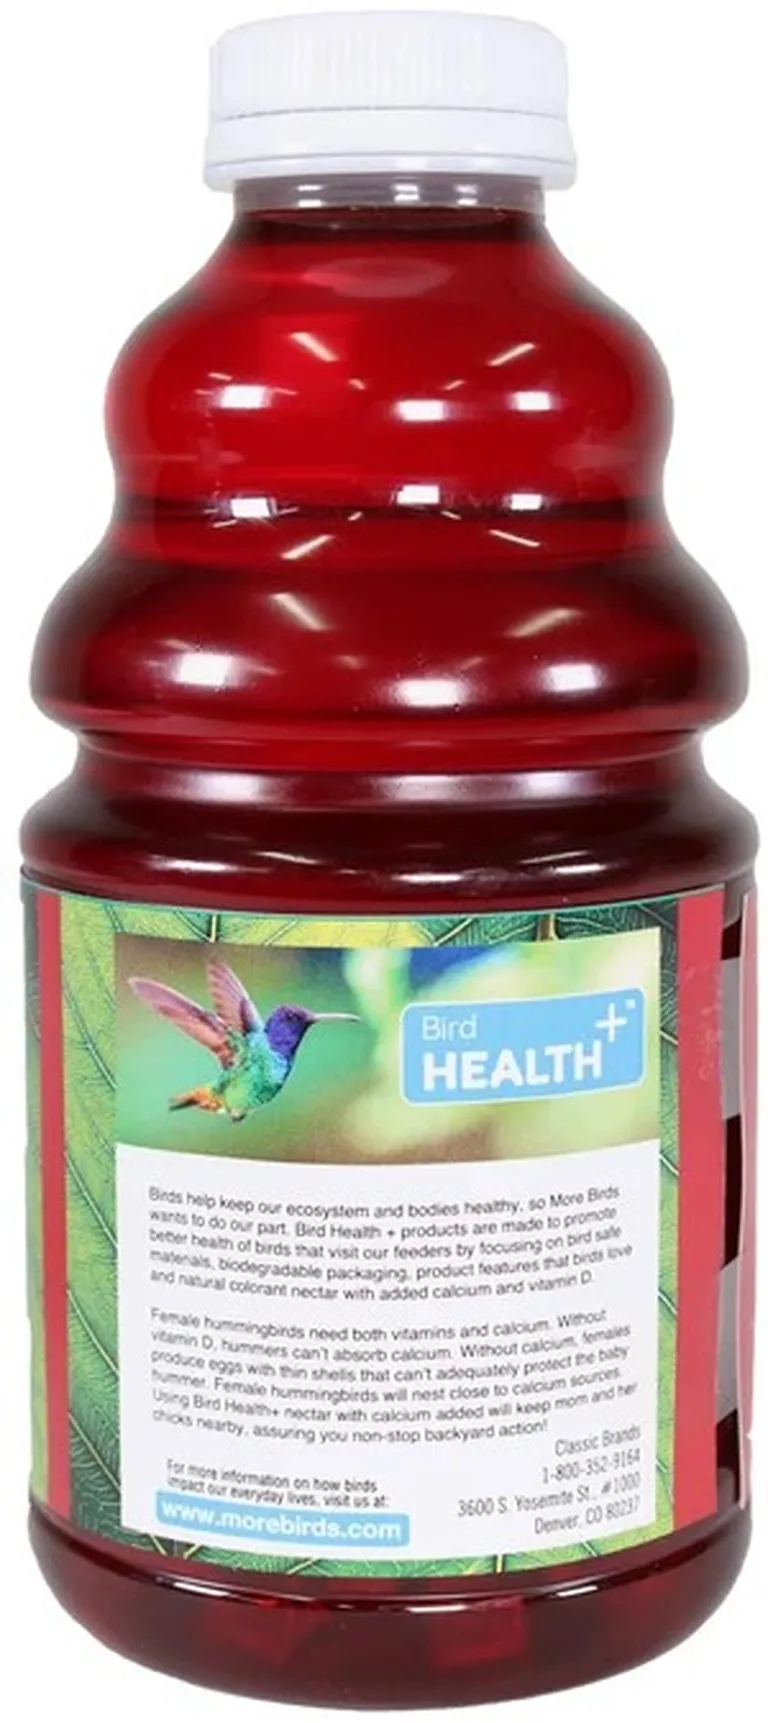 More Birds Health Plus Natural Red Hummingbird Nectar Concentrate Photo 2